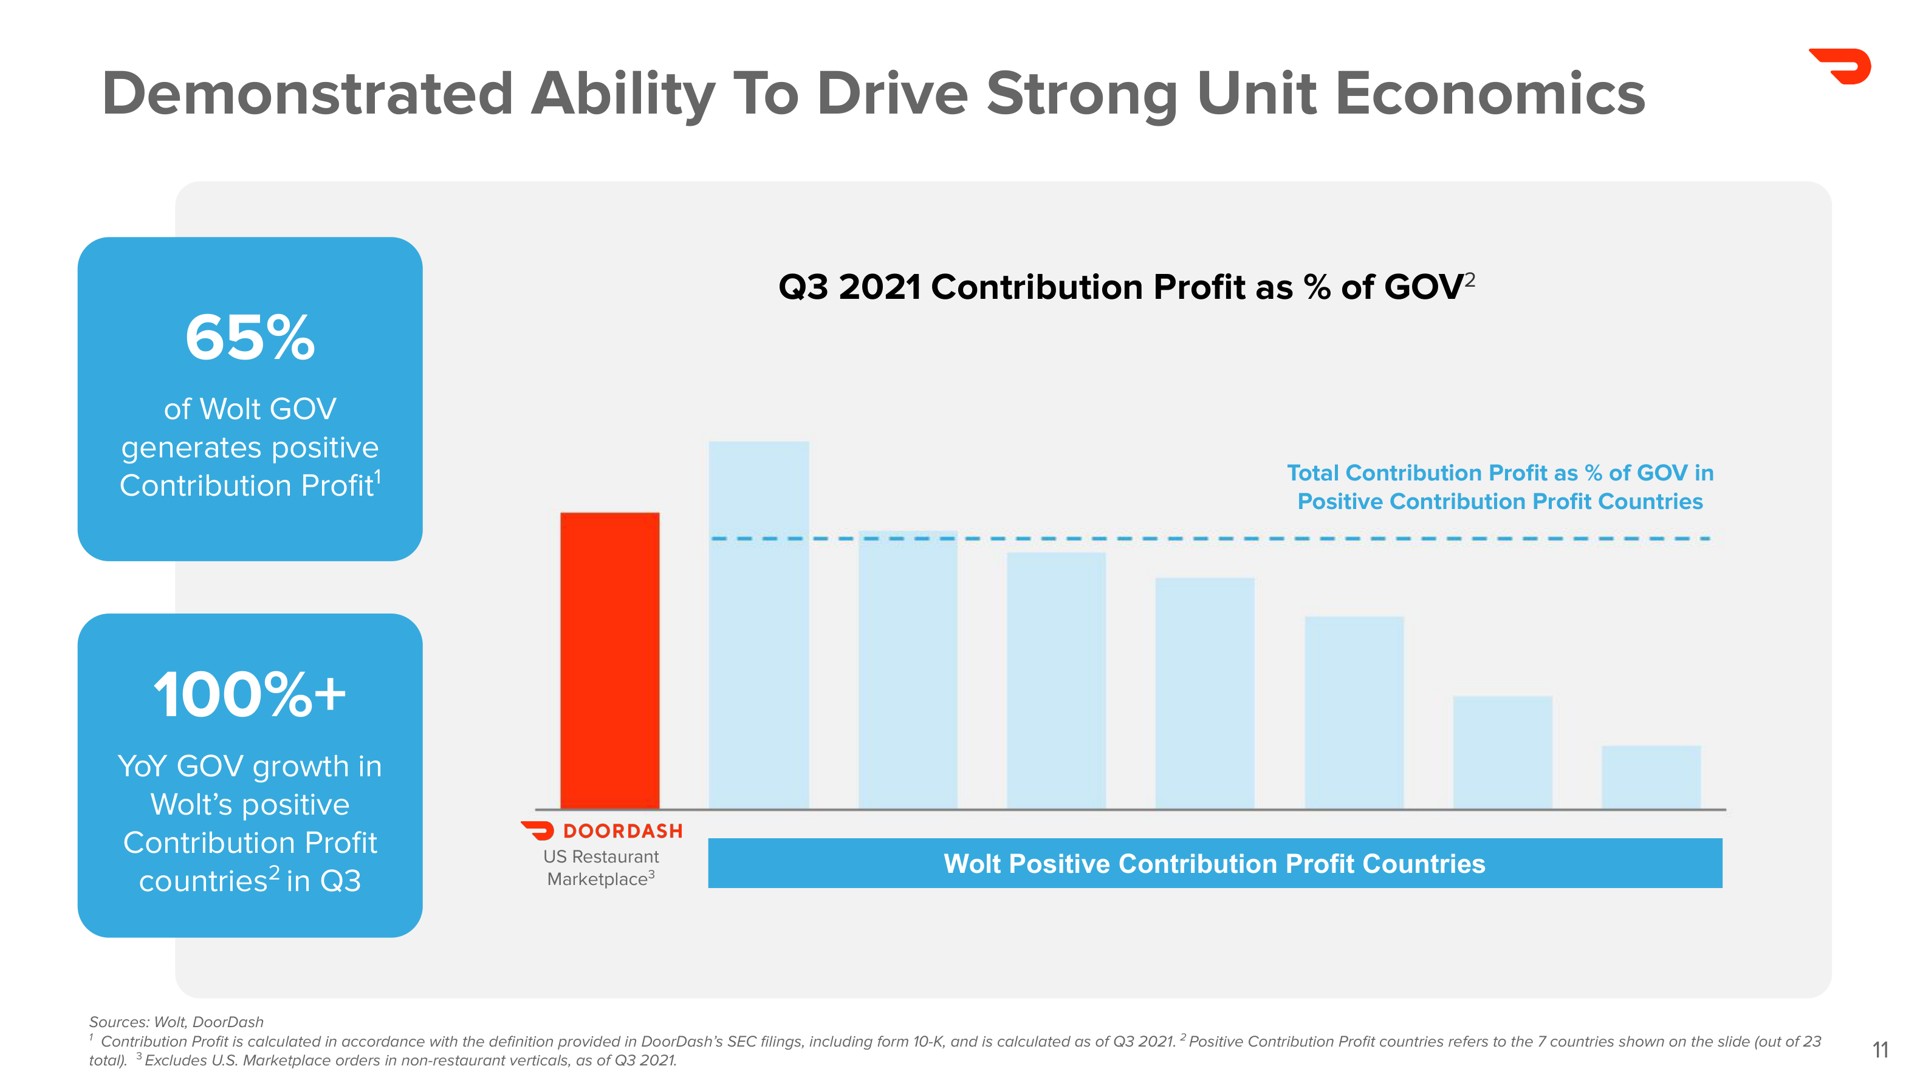 projects divinities presentations investor presentation warsaw investor presentation demonstrated ability to drive strong unit economics of generates positive contribution pro yoy growth in positive contribution pro countries in contribution pro as of total contribution pro as of in positive contribution pro countries positive contribution profit countries | DoorDash